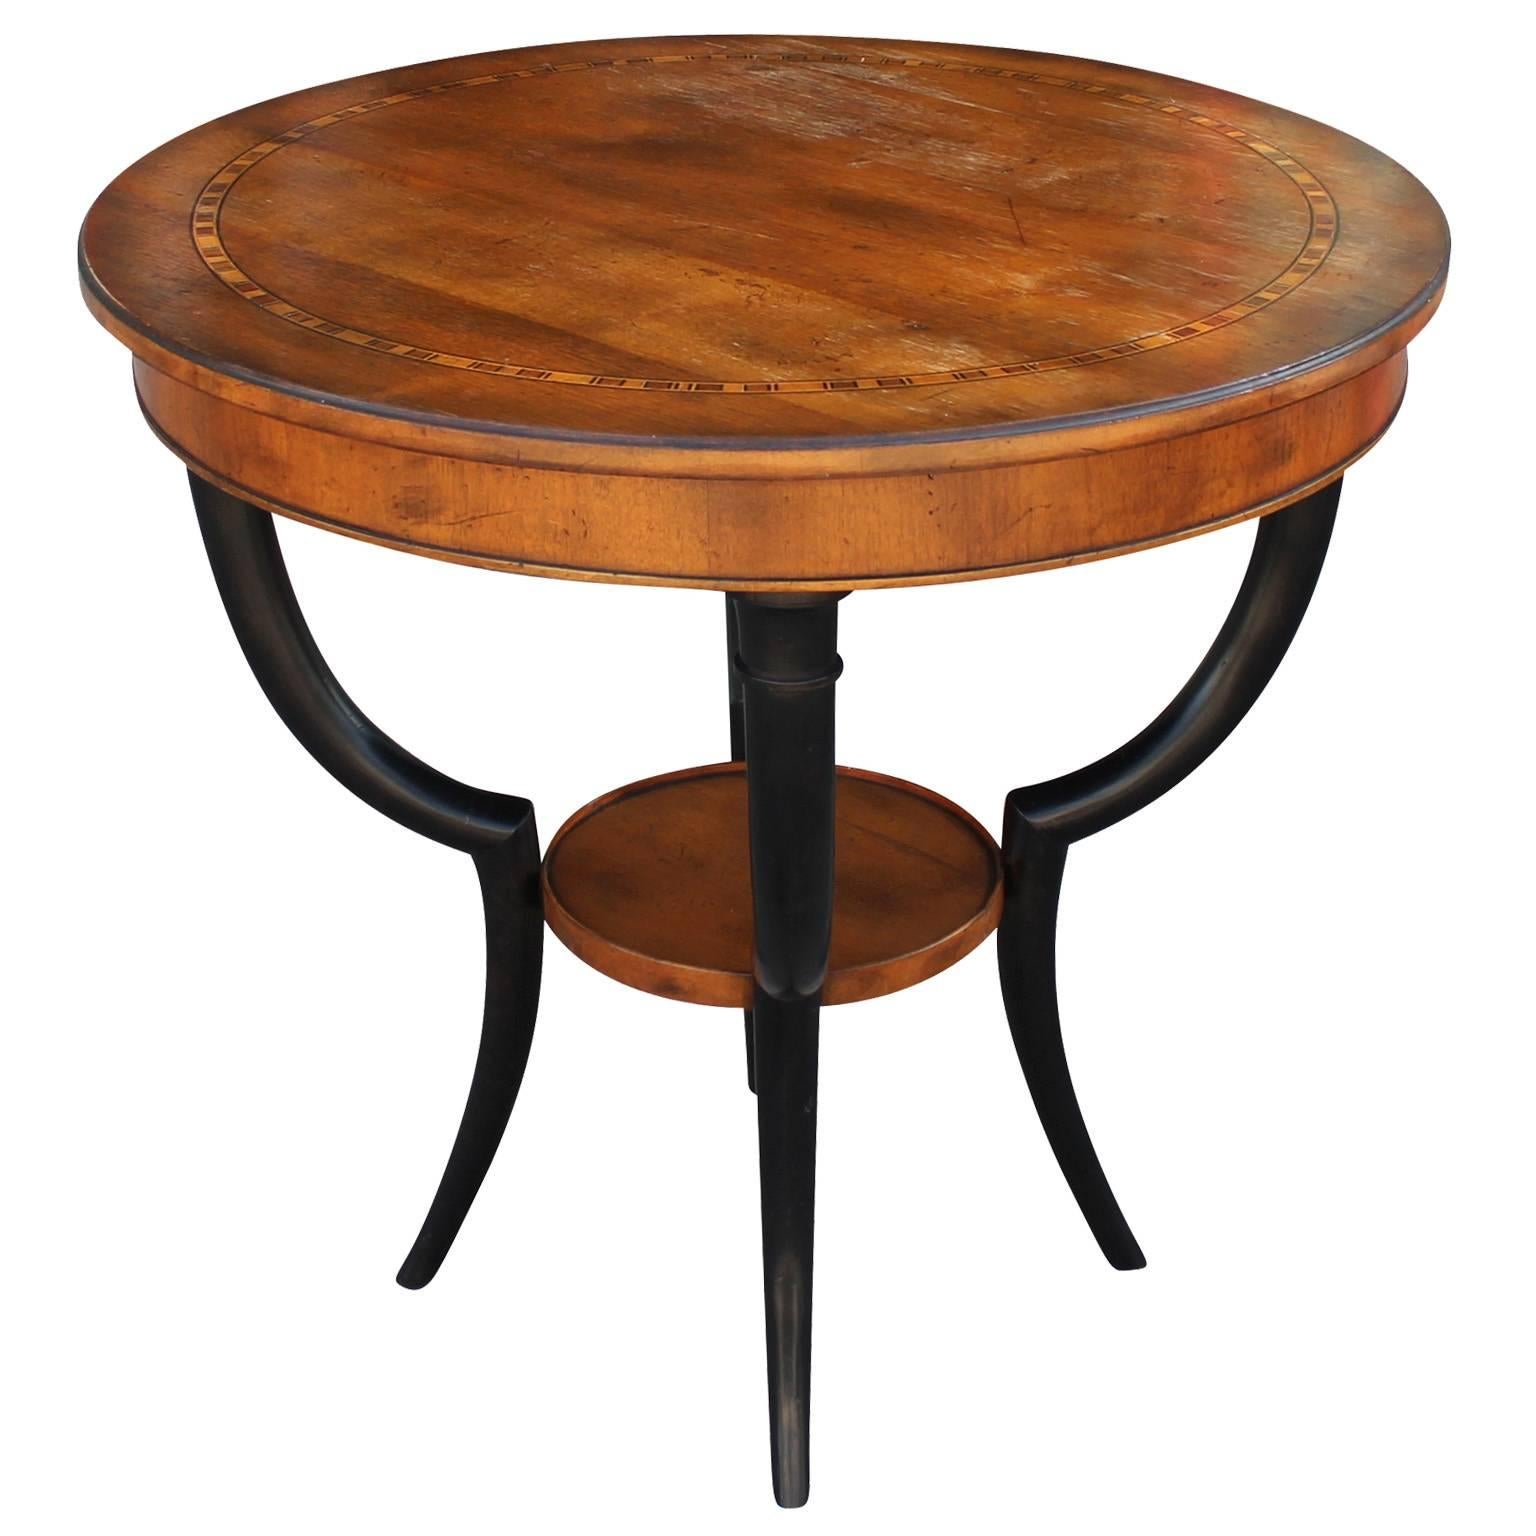 Beautiful occasional table by Baker. Two-tone round table has elegant swooping lines. Top is accented with a delicate band of inlaid wood.